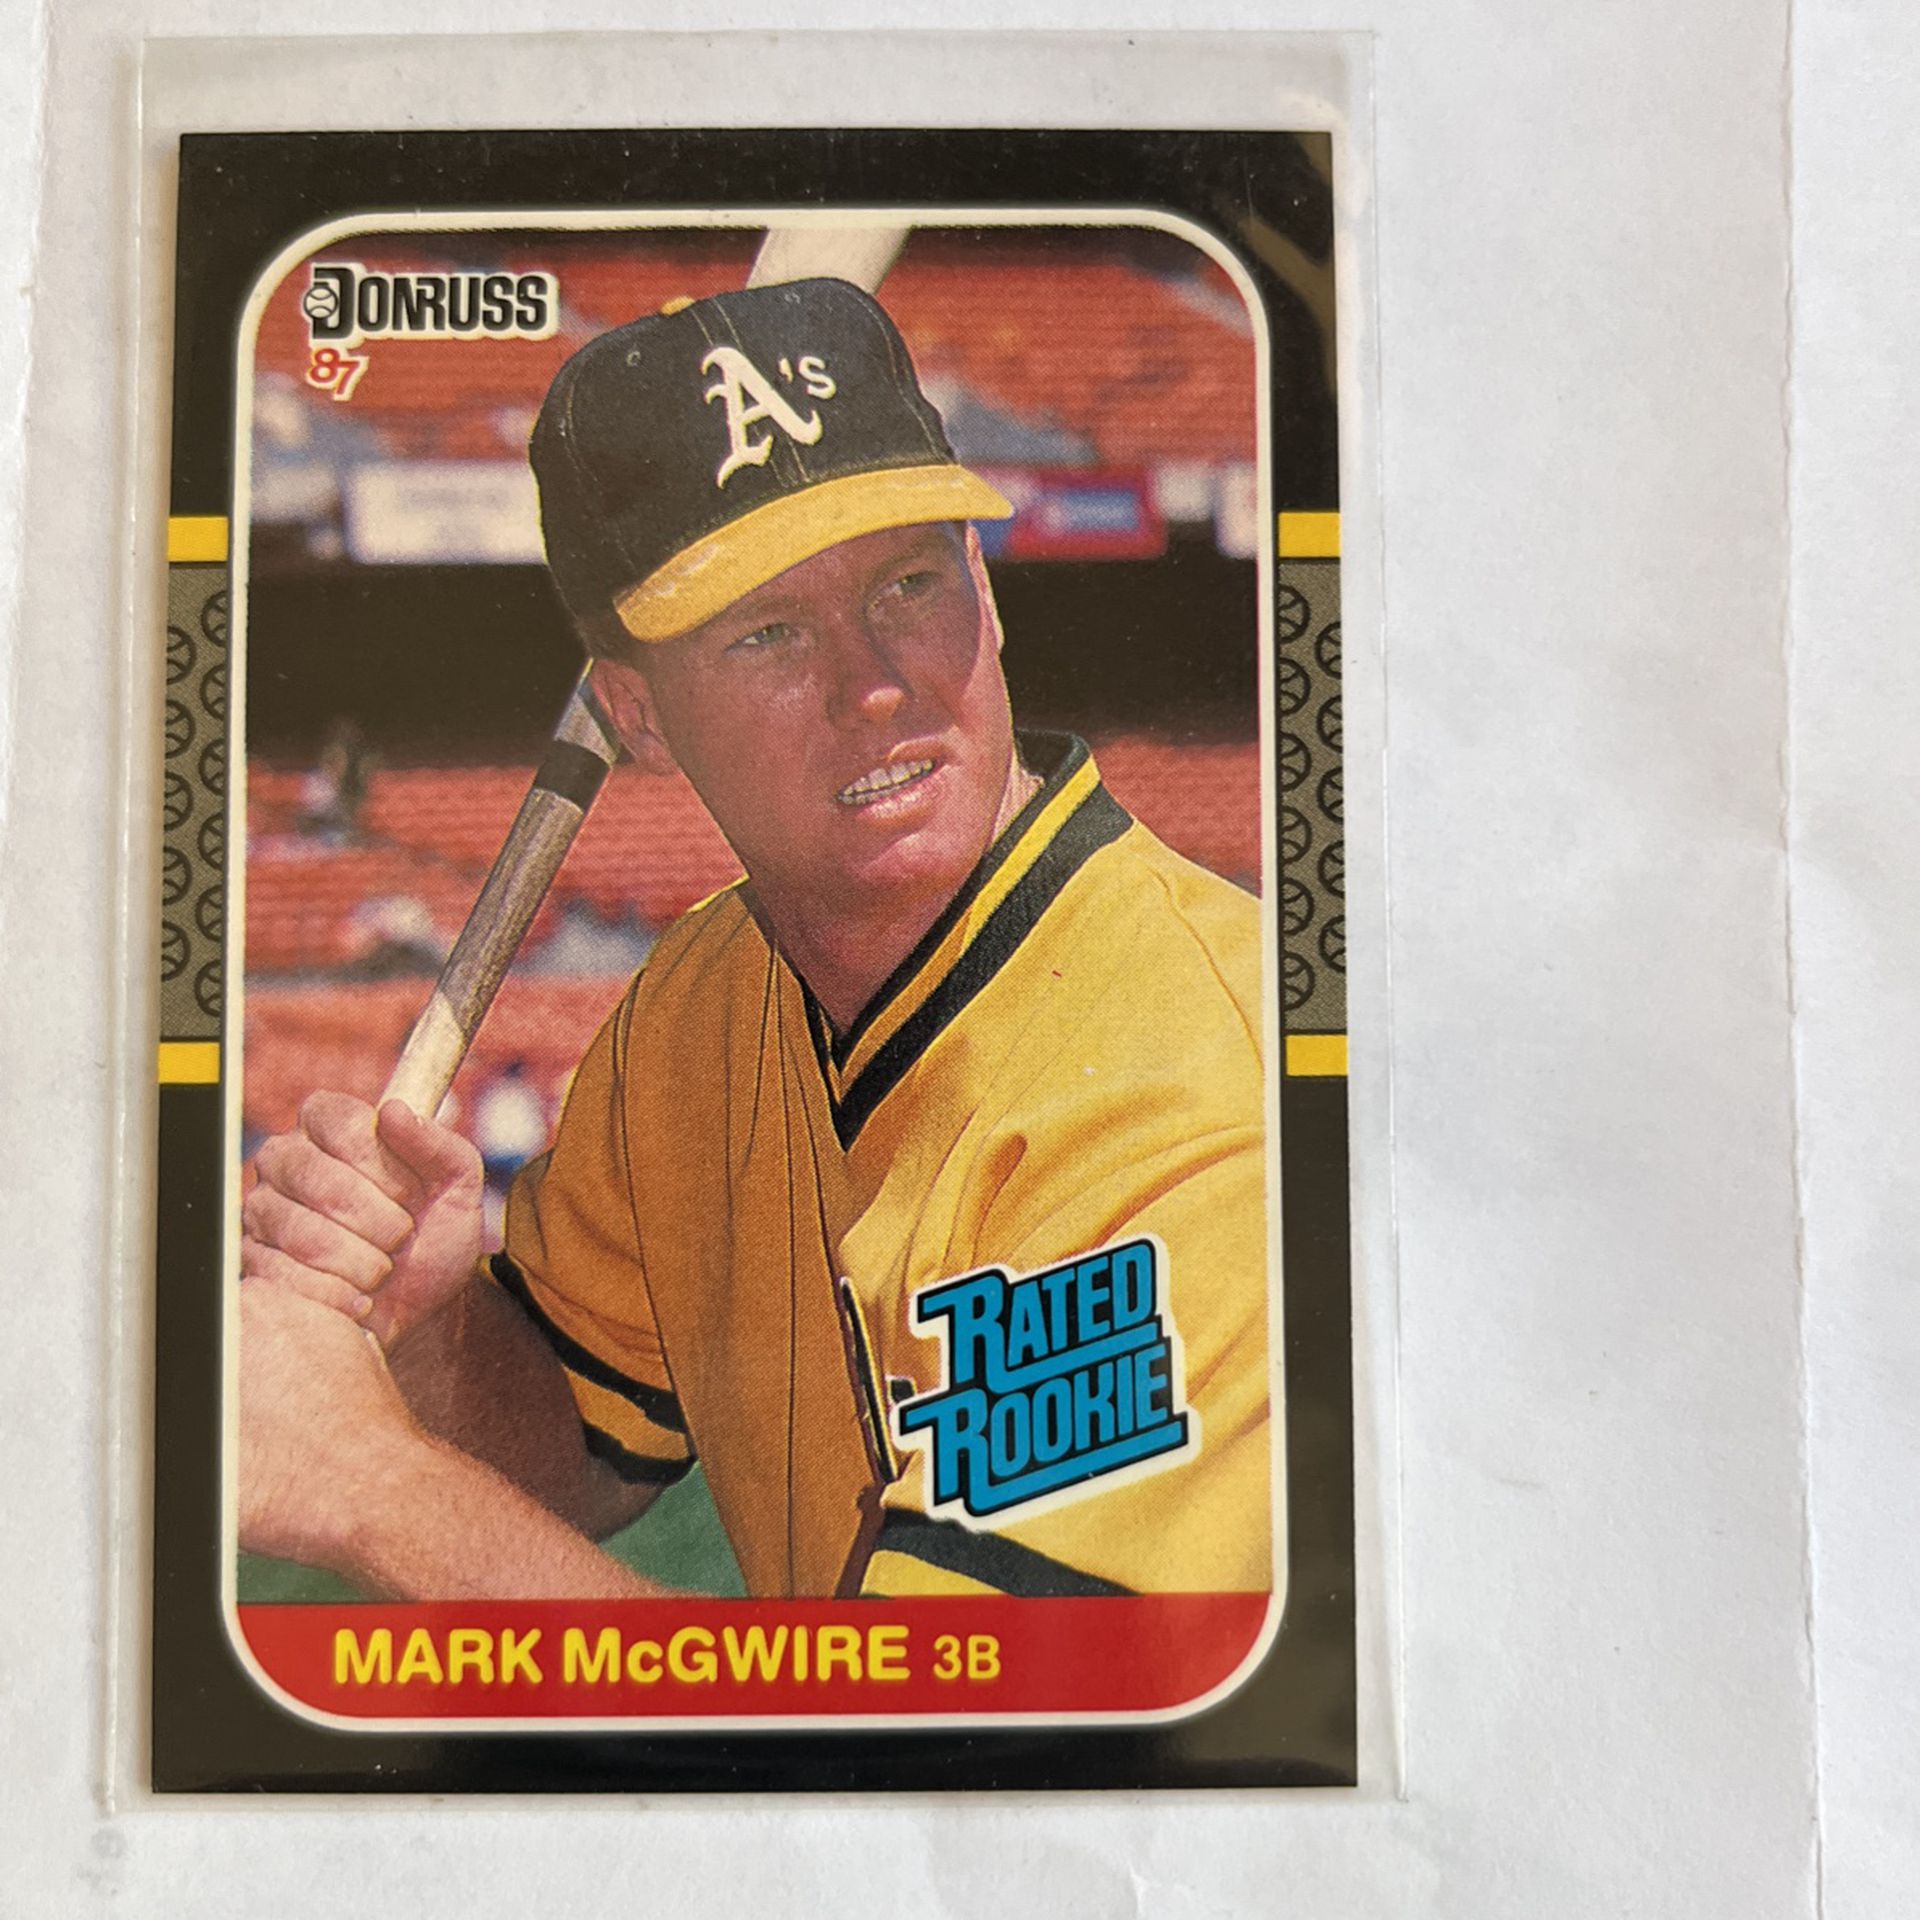 1987donruss Mark McGwire Rated Rookie#46!